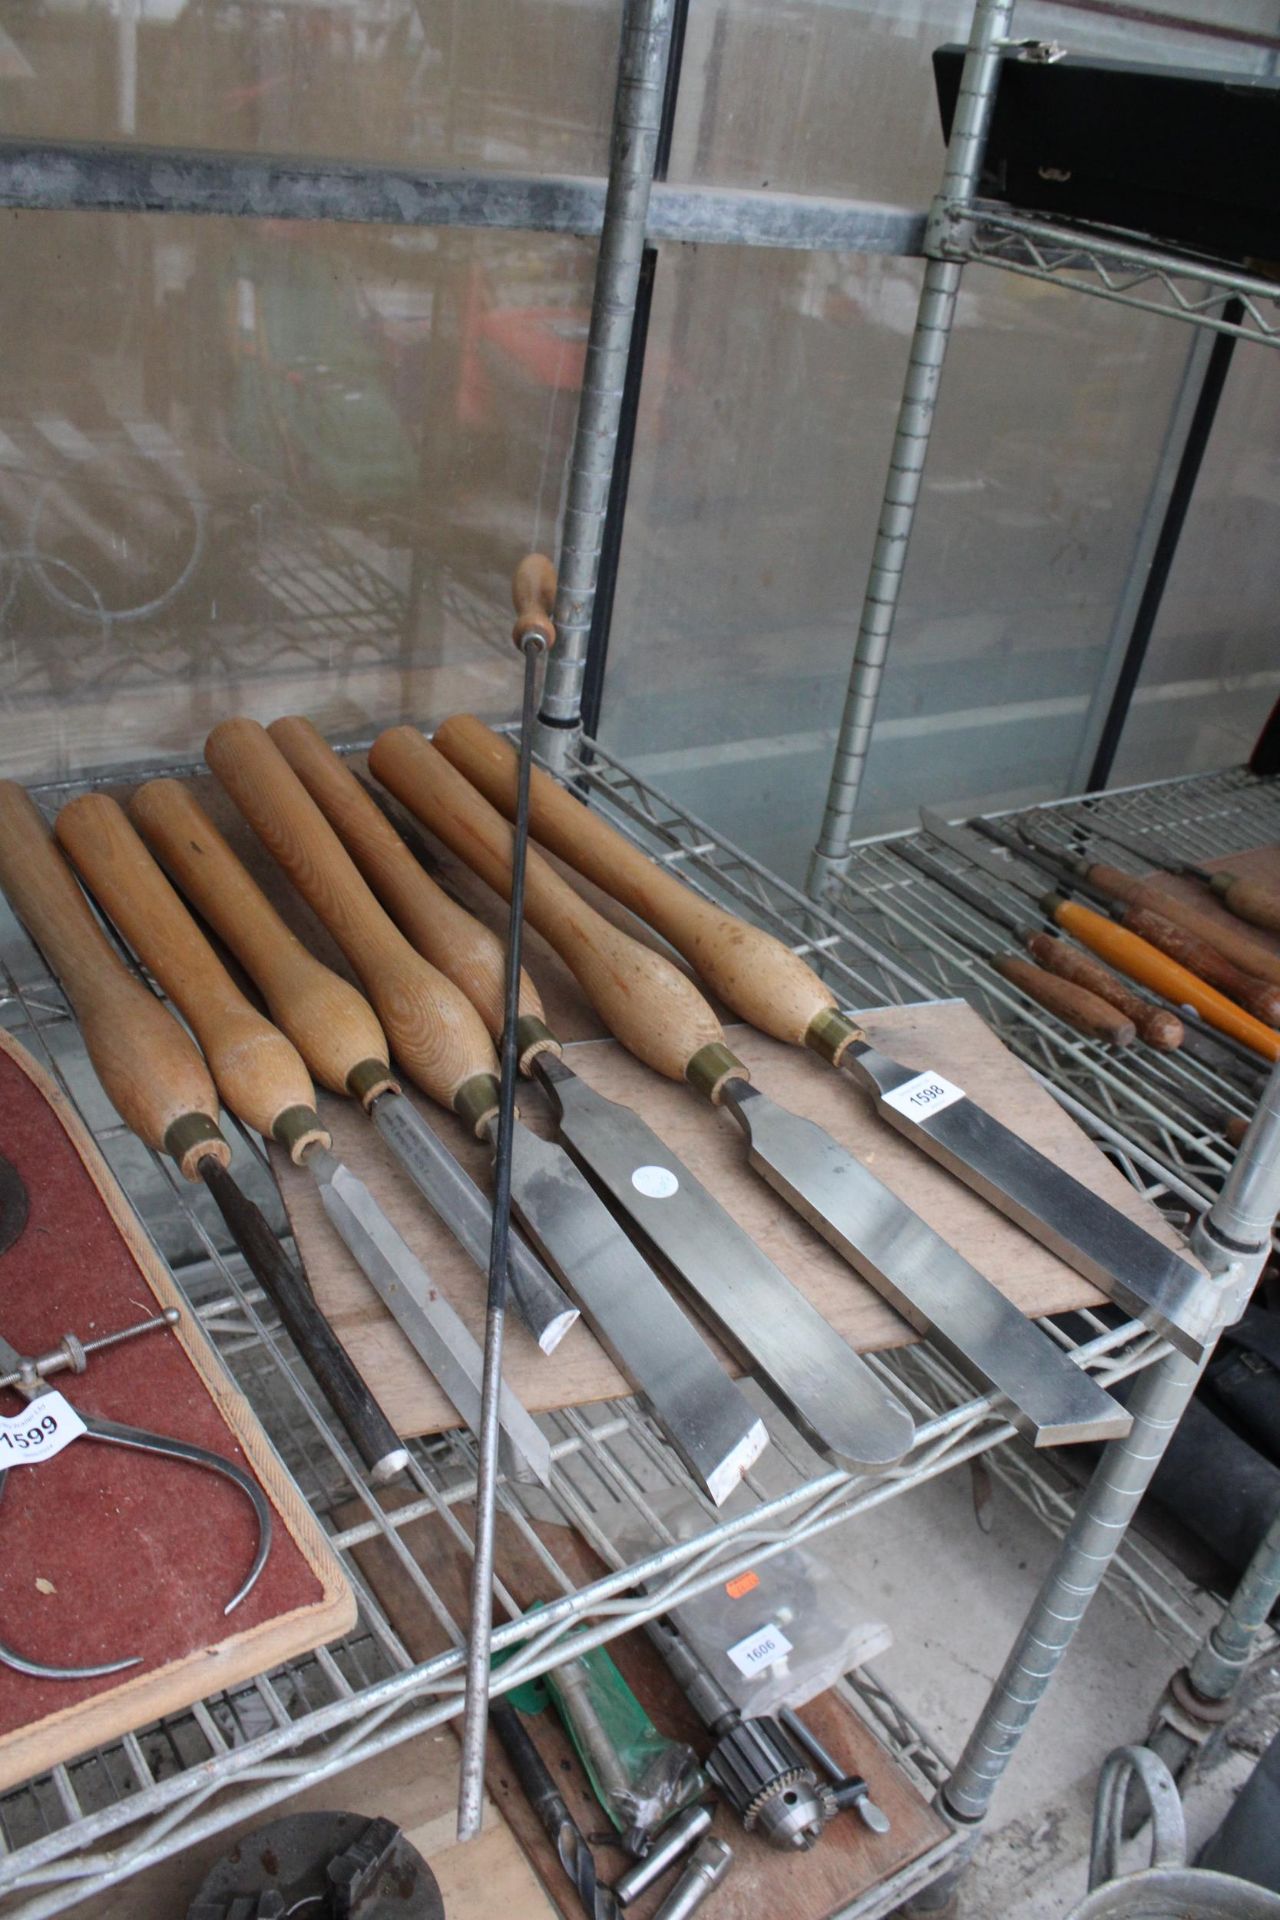 AN ASSORTMENT OF EIGHT LARGE WOODEN HANDLE LATHE TOOLS AND CHISELS - Image 2 of 5